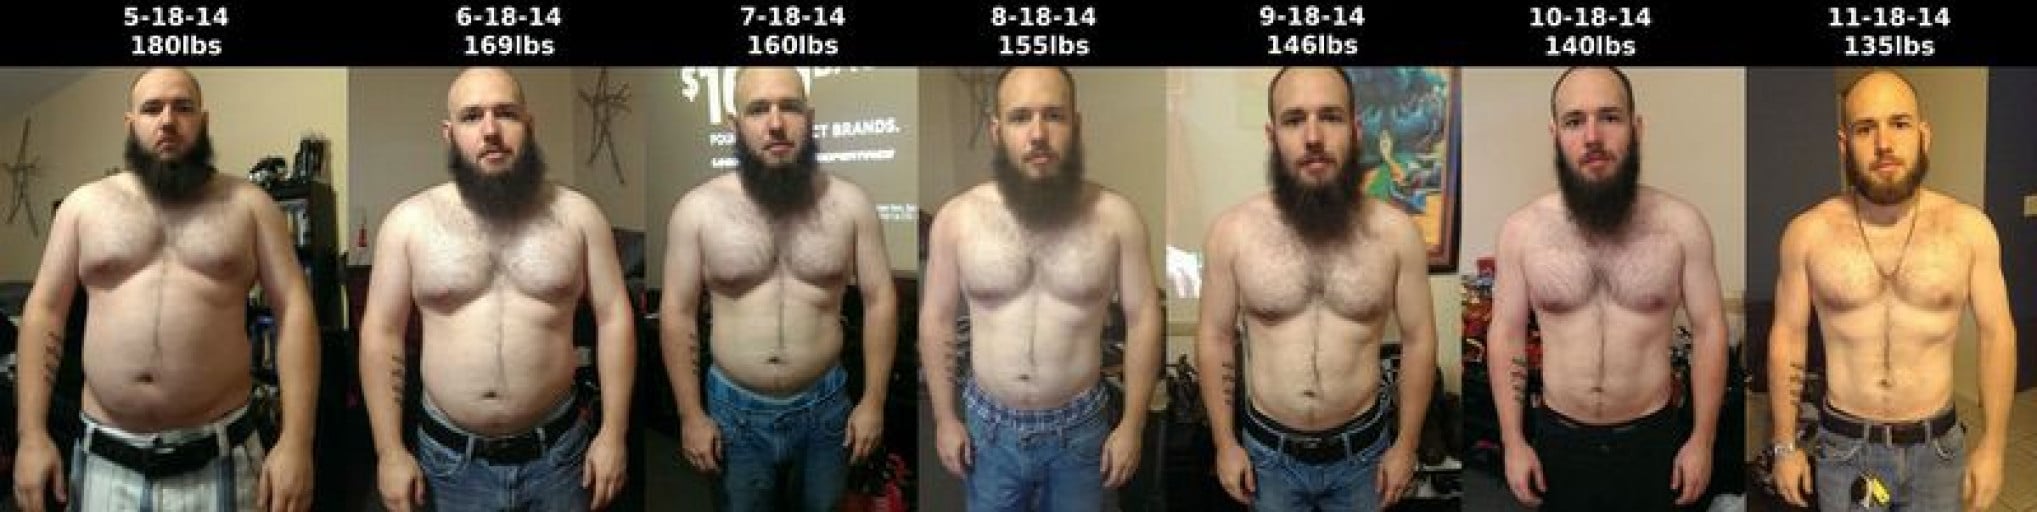 A before and after photo of a 5'3" male showing a weight reduction from 180 pounds to 135 pounds. A total loss of 45 pounds.